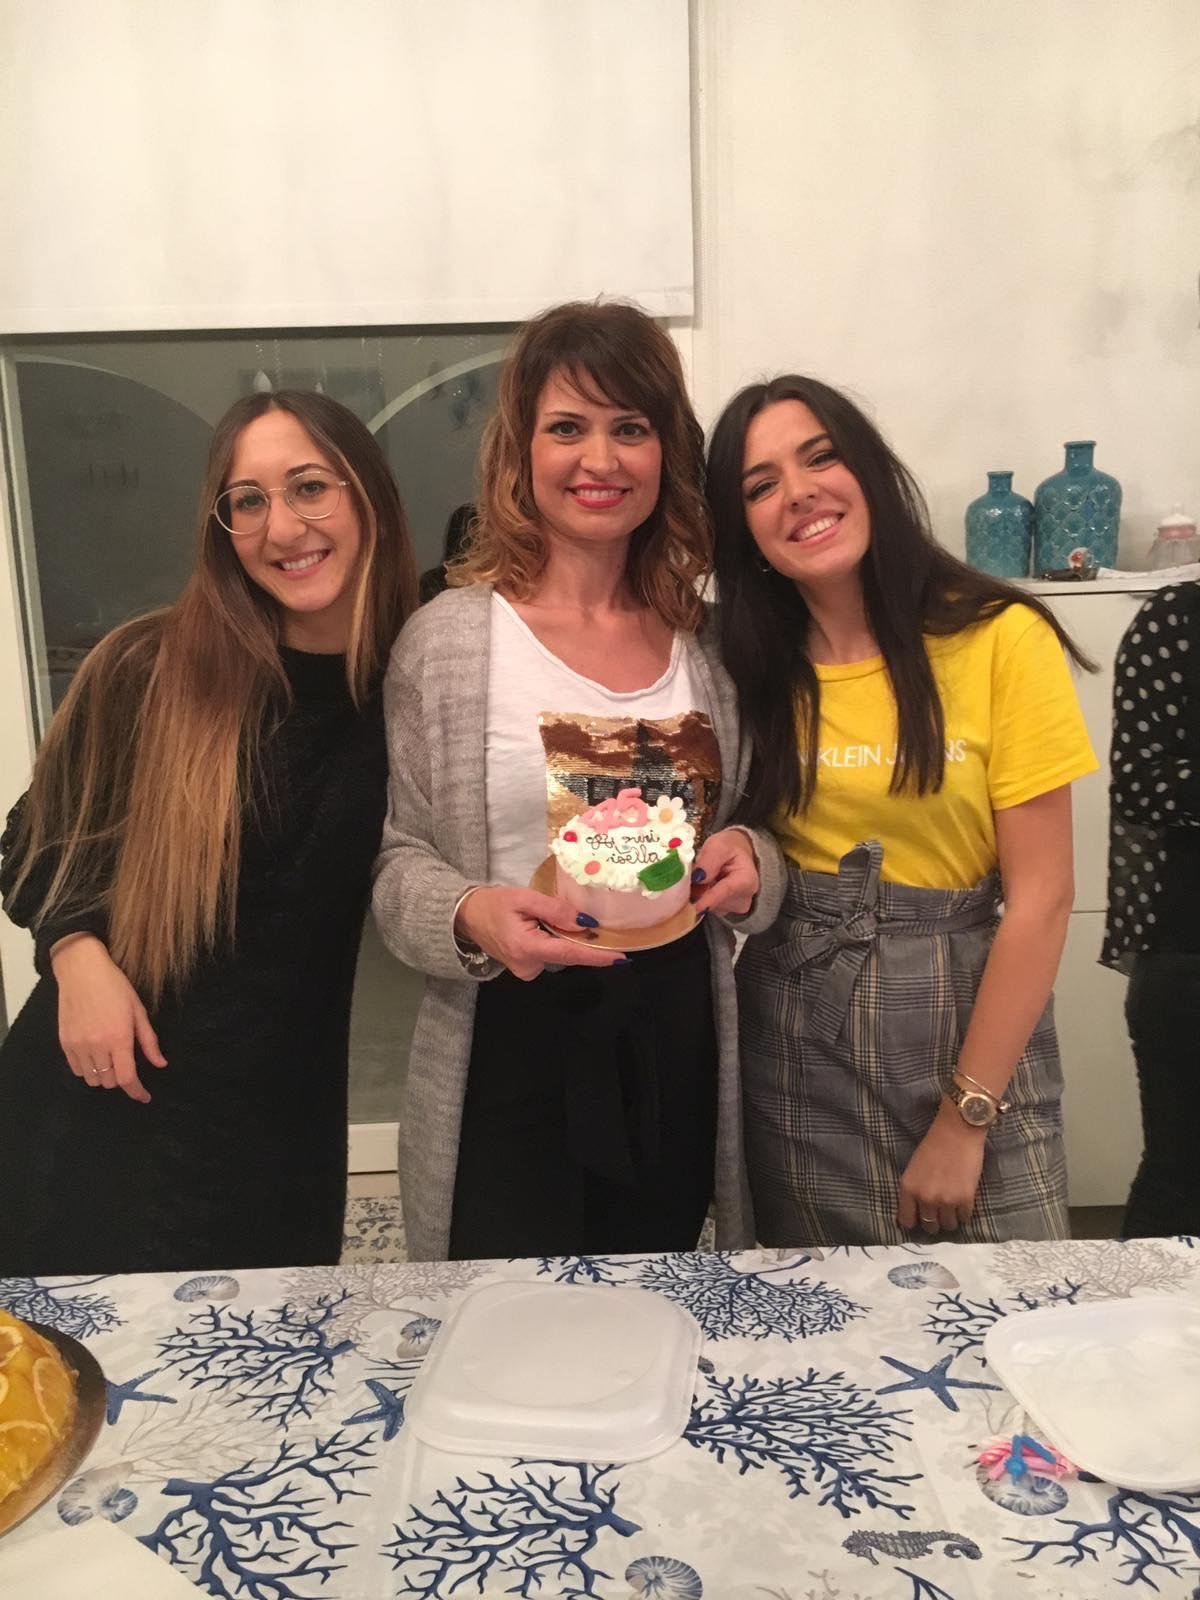 Caterina (L) with Gisella and Melissa. (Courtesy of Caterina Alagna)